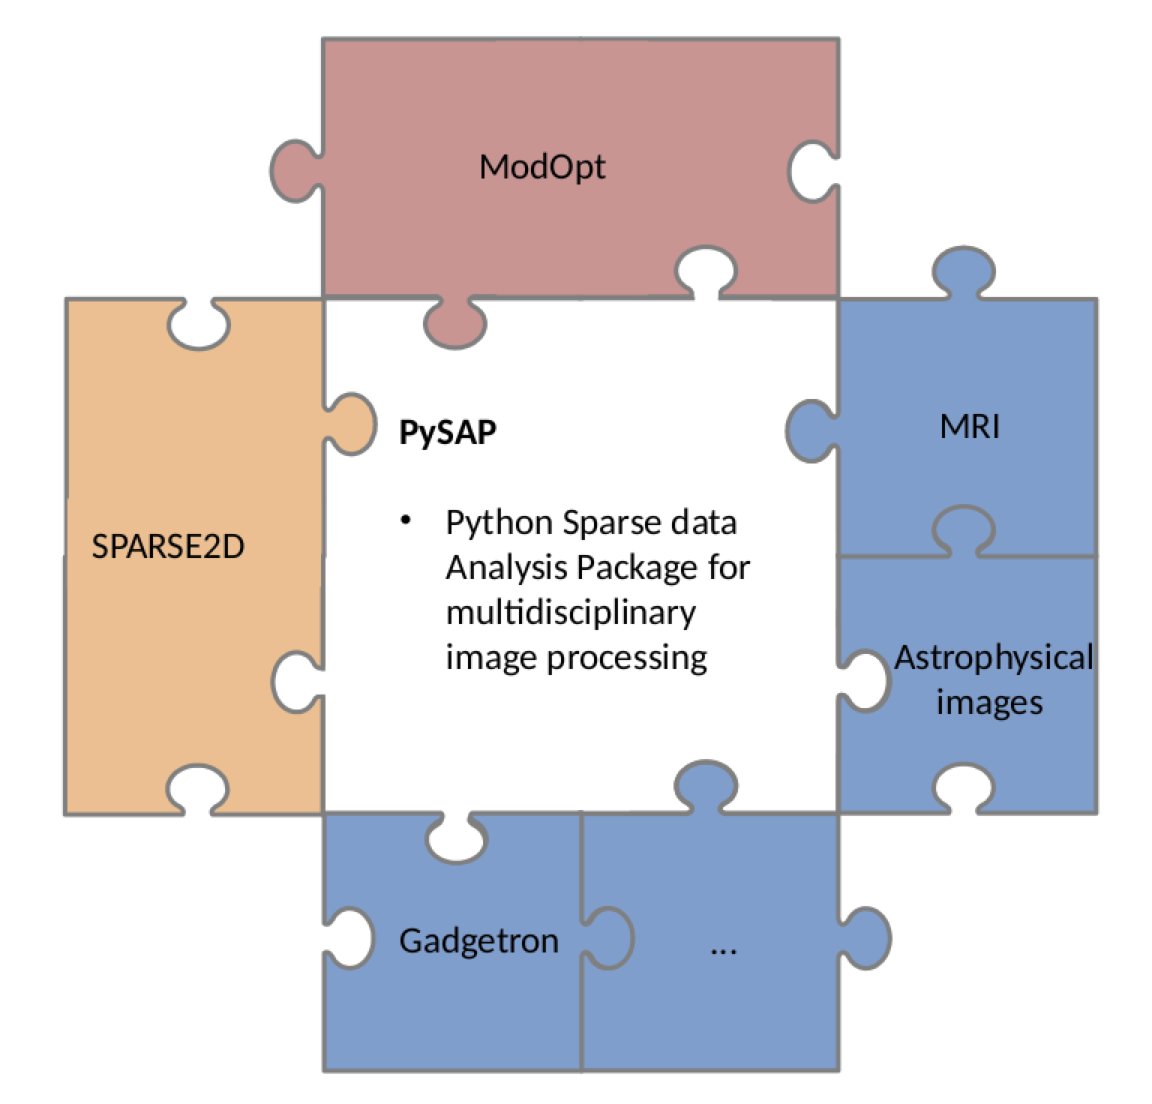 PySAP: Python Sparse Data Analysis Package for Multidisciplinary Image Processing